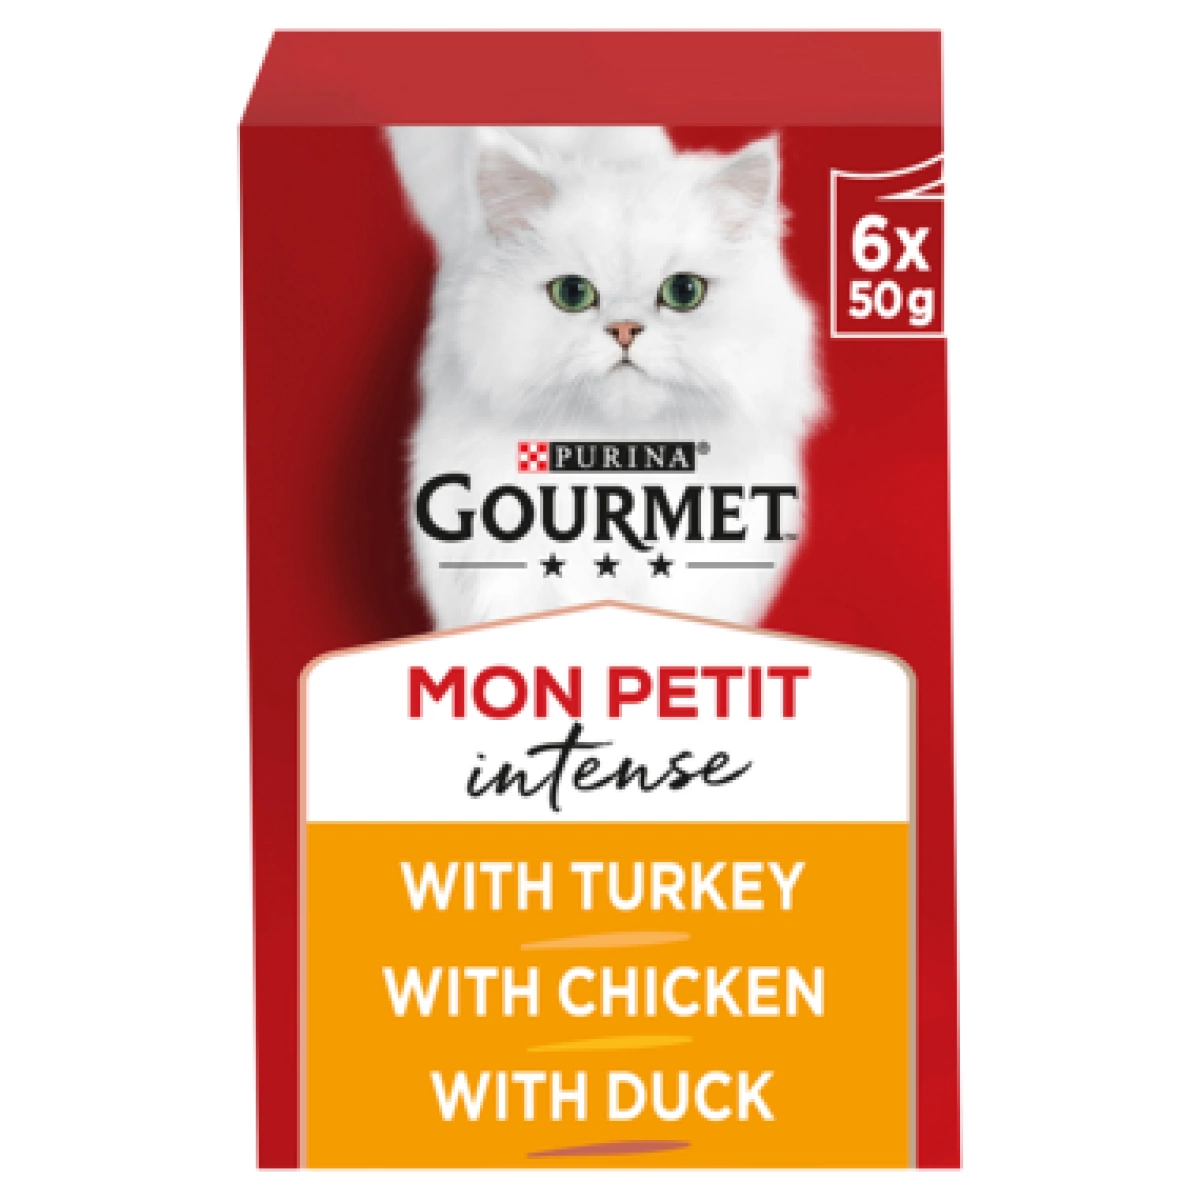 Gourmet Mon Petit Intense - Poultry Meaty Variety 6 x 50g Main Image